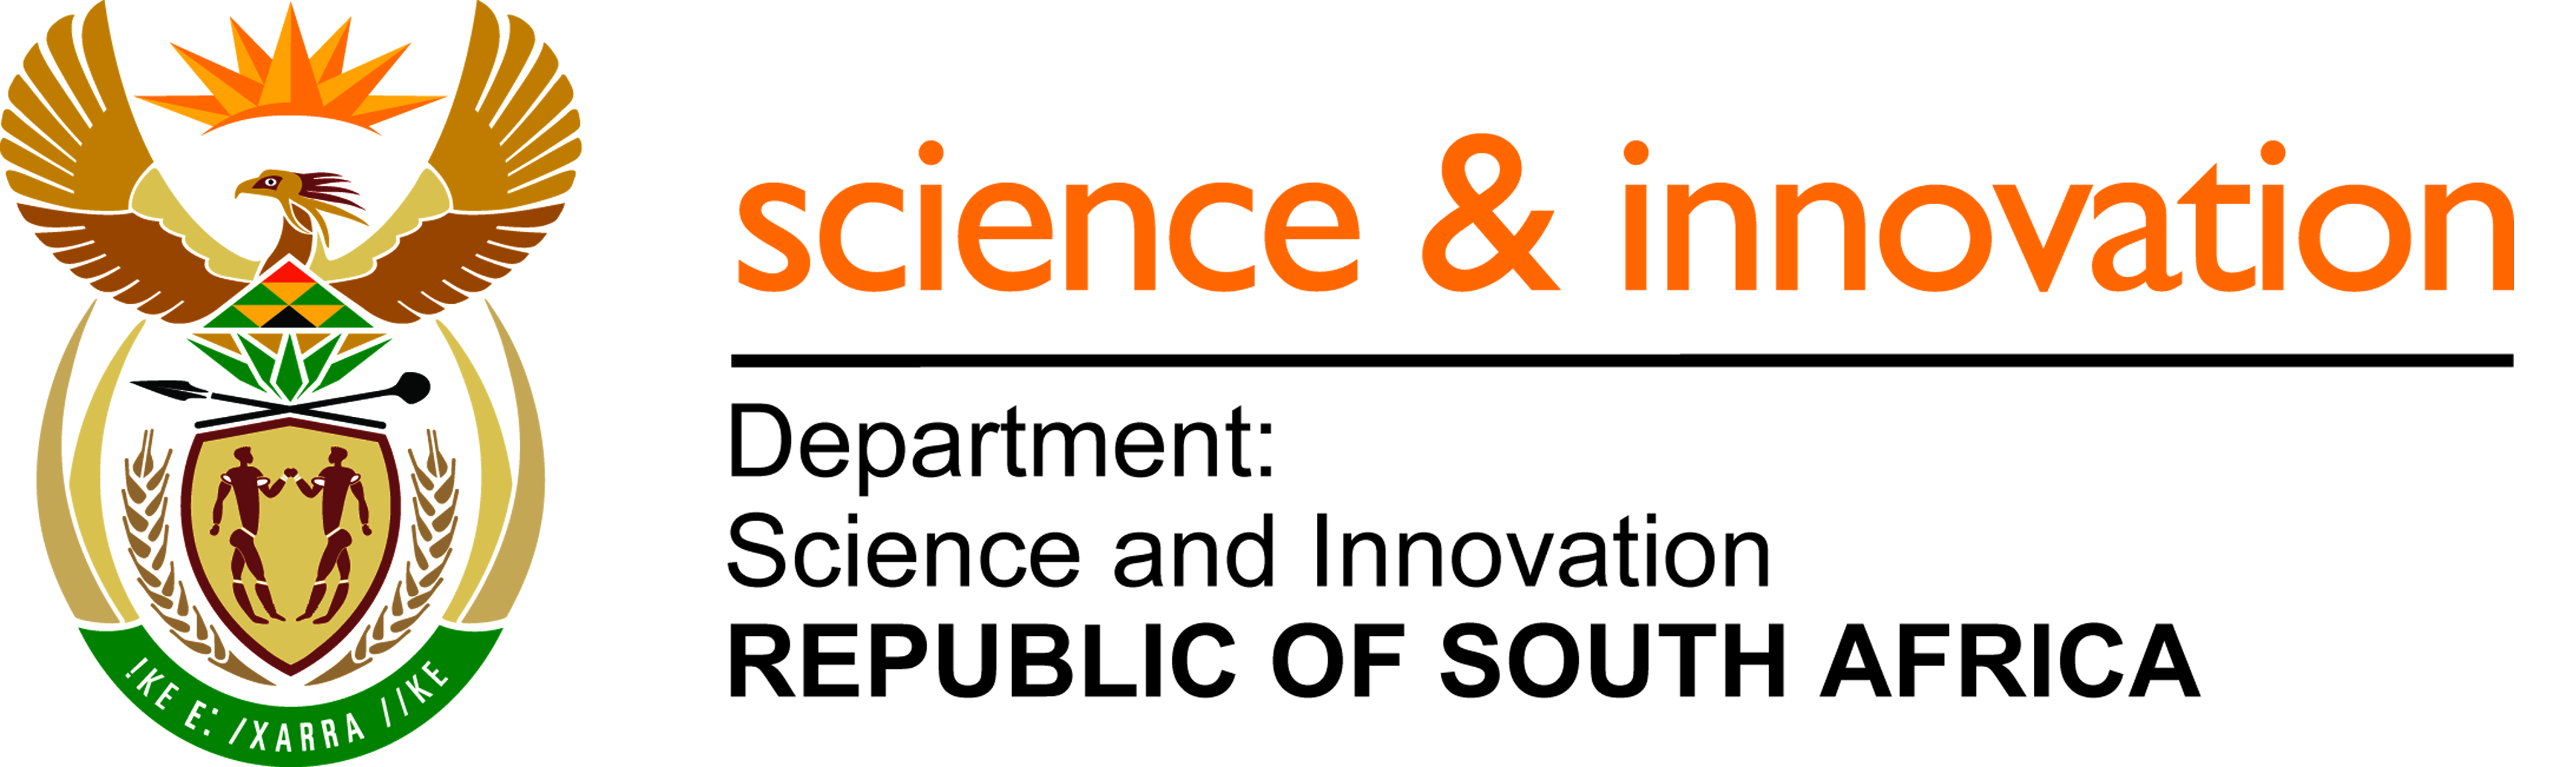 Department of Science and Innovation, South Africa